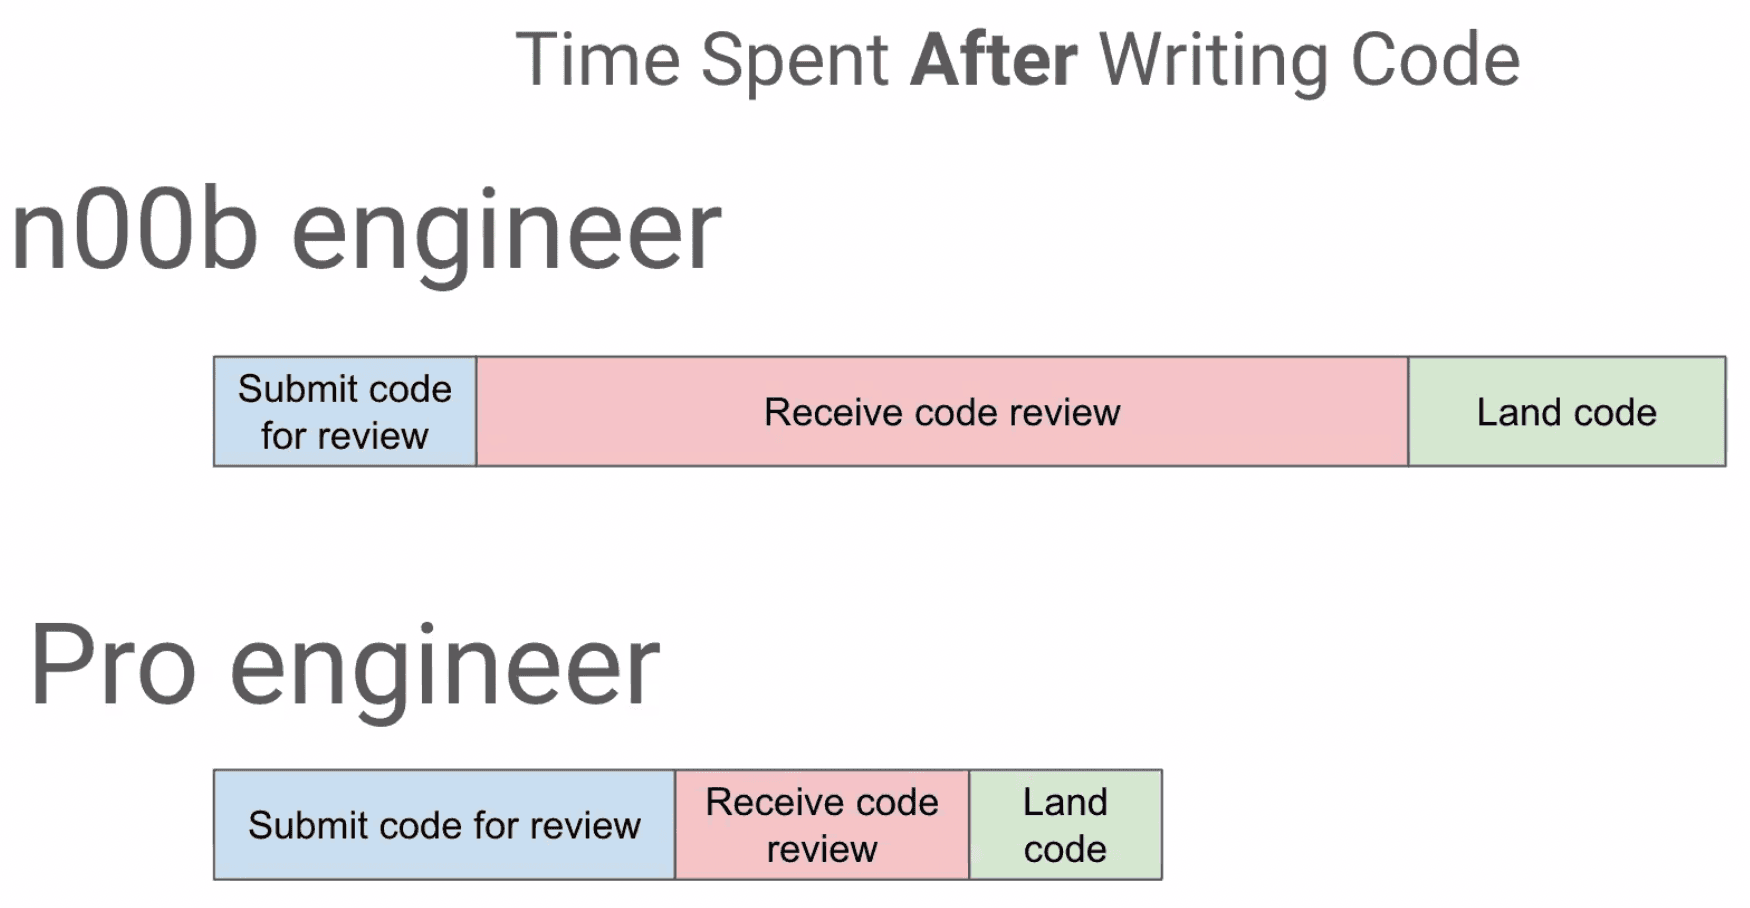 Comparison of time spent after writing code